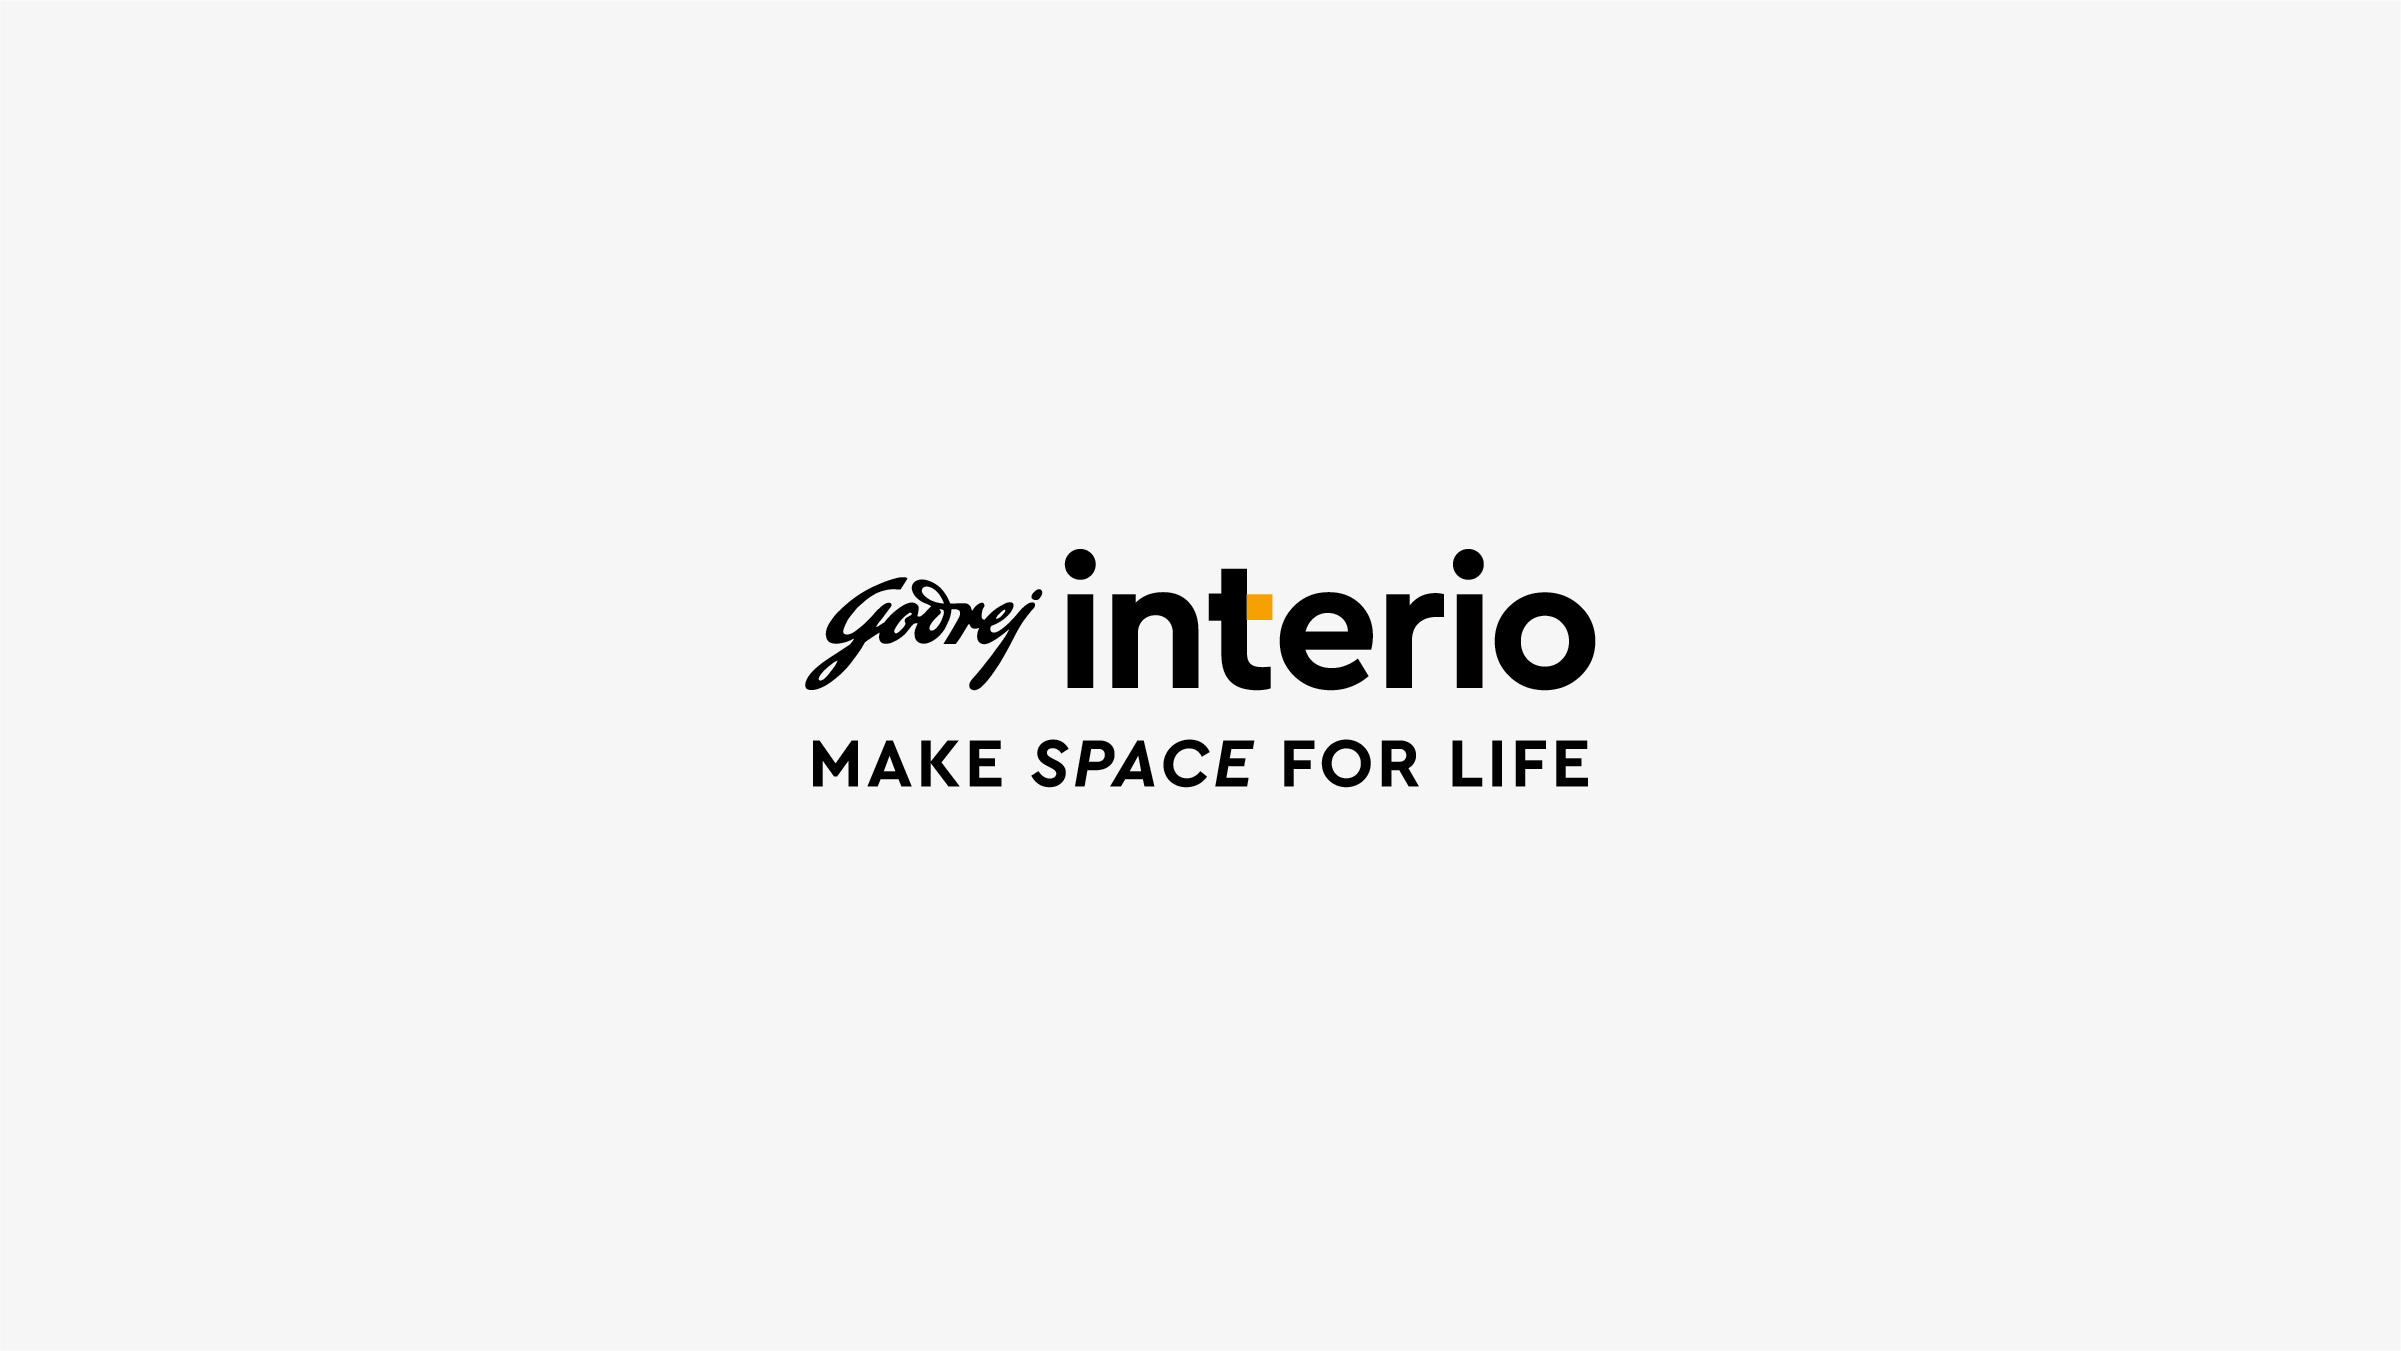 godrej-interio-targets-to-increase-the-delivery-points-to-300-cities-by-the-end-of-fy-22-23